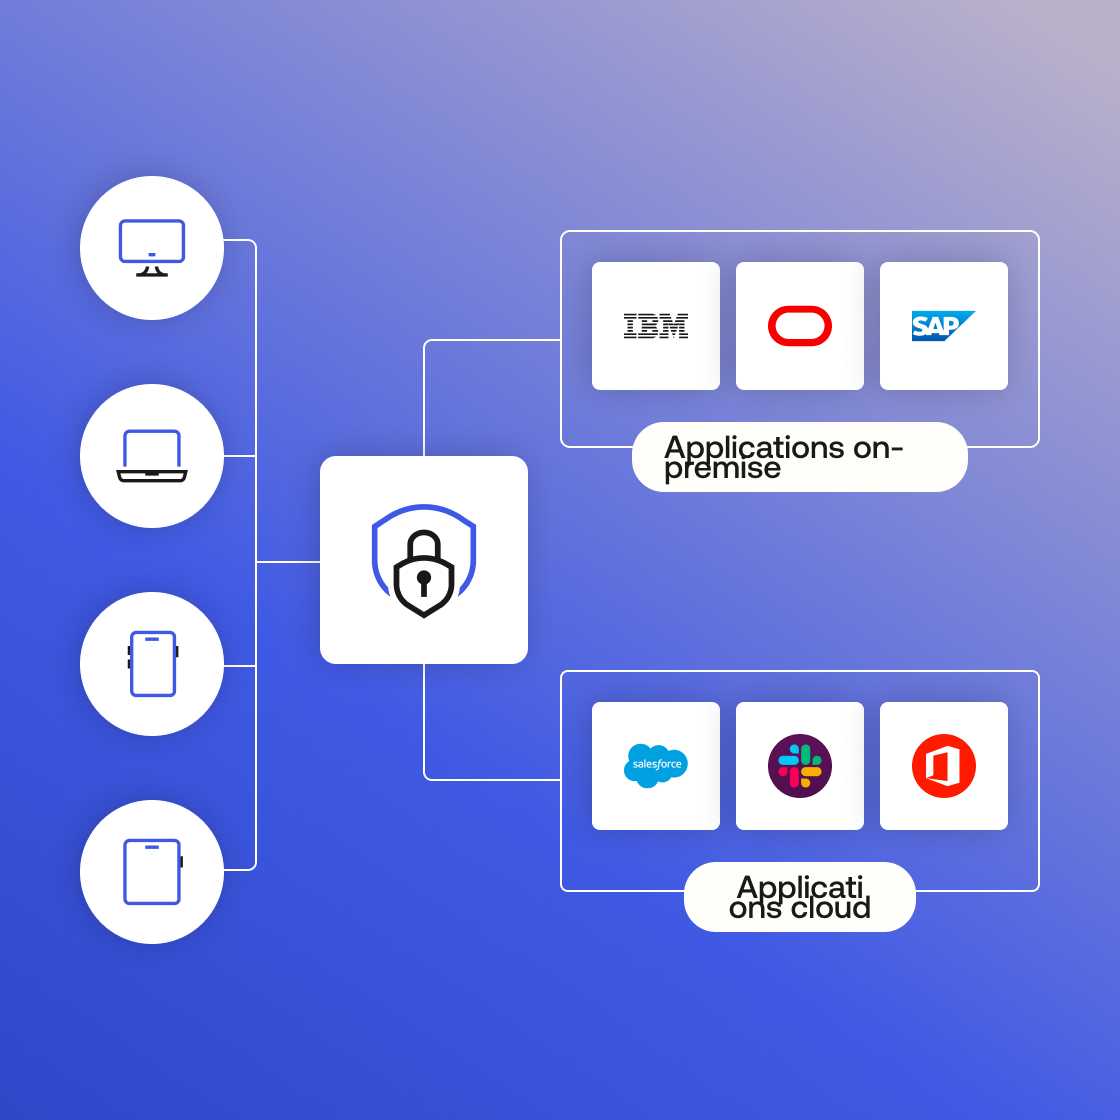 A graphic of icons of a computer, tablet, phone, and laptop, all securely connected to their apps through a padlock icon.